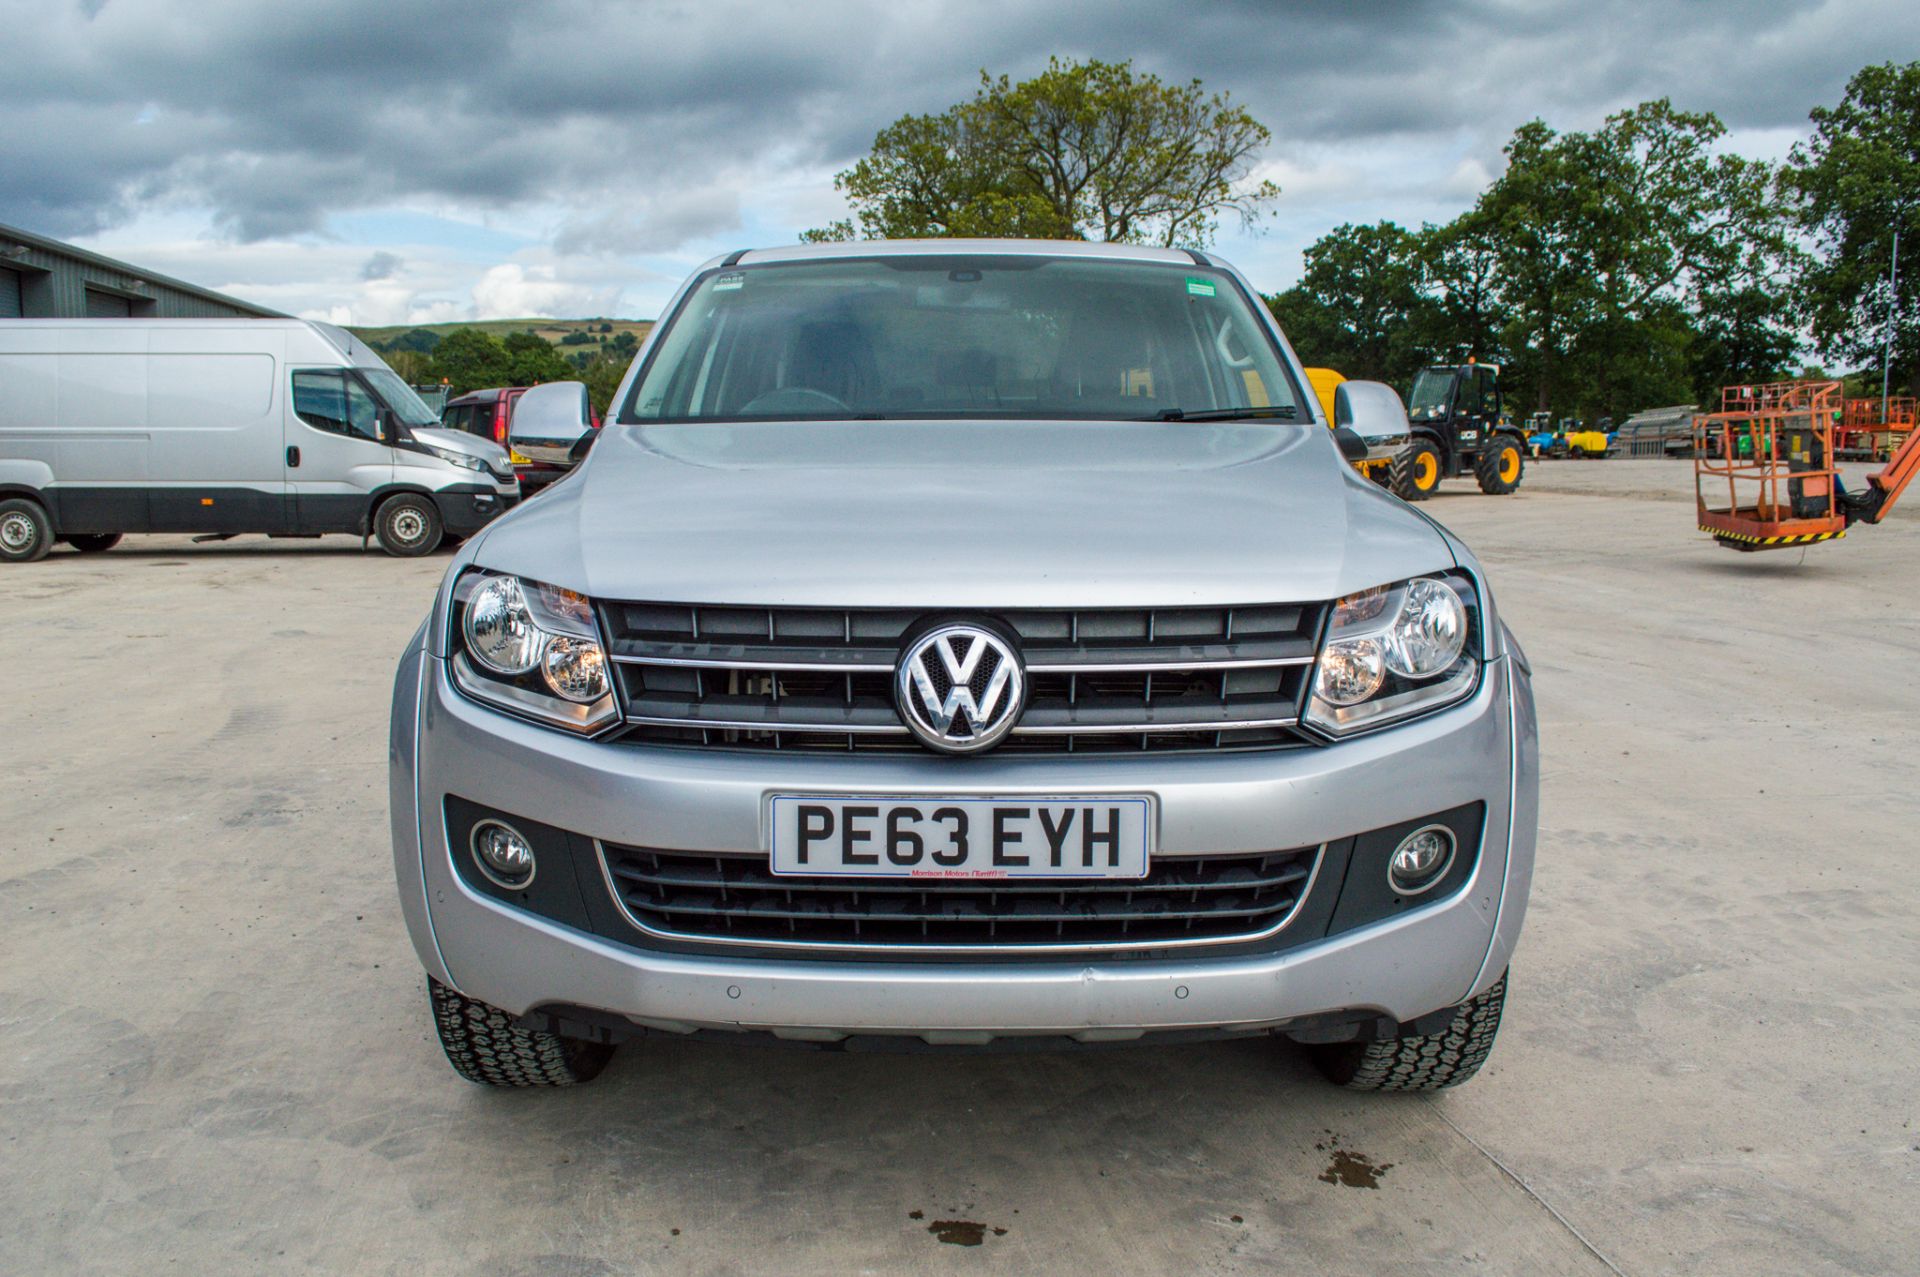 Volkswagen Amarok 2.0 TDI highline 4wd automatic double cab pick up Reg No: PE63 EYH Date of - Image 5 of 30